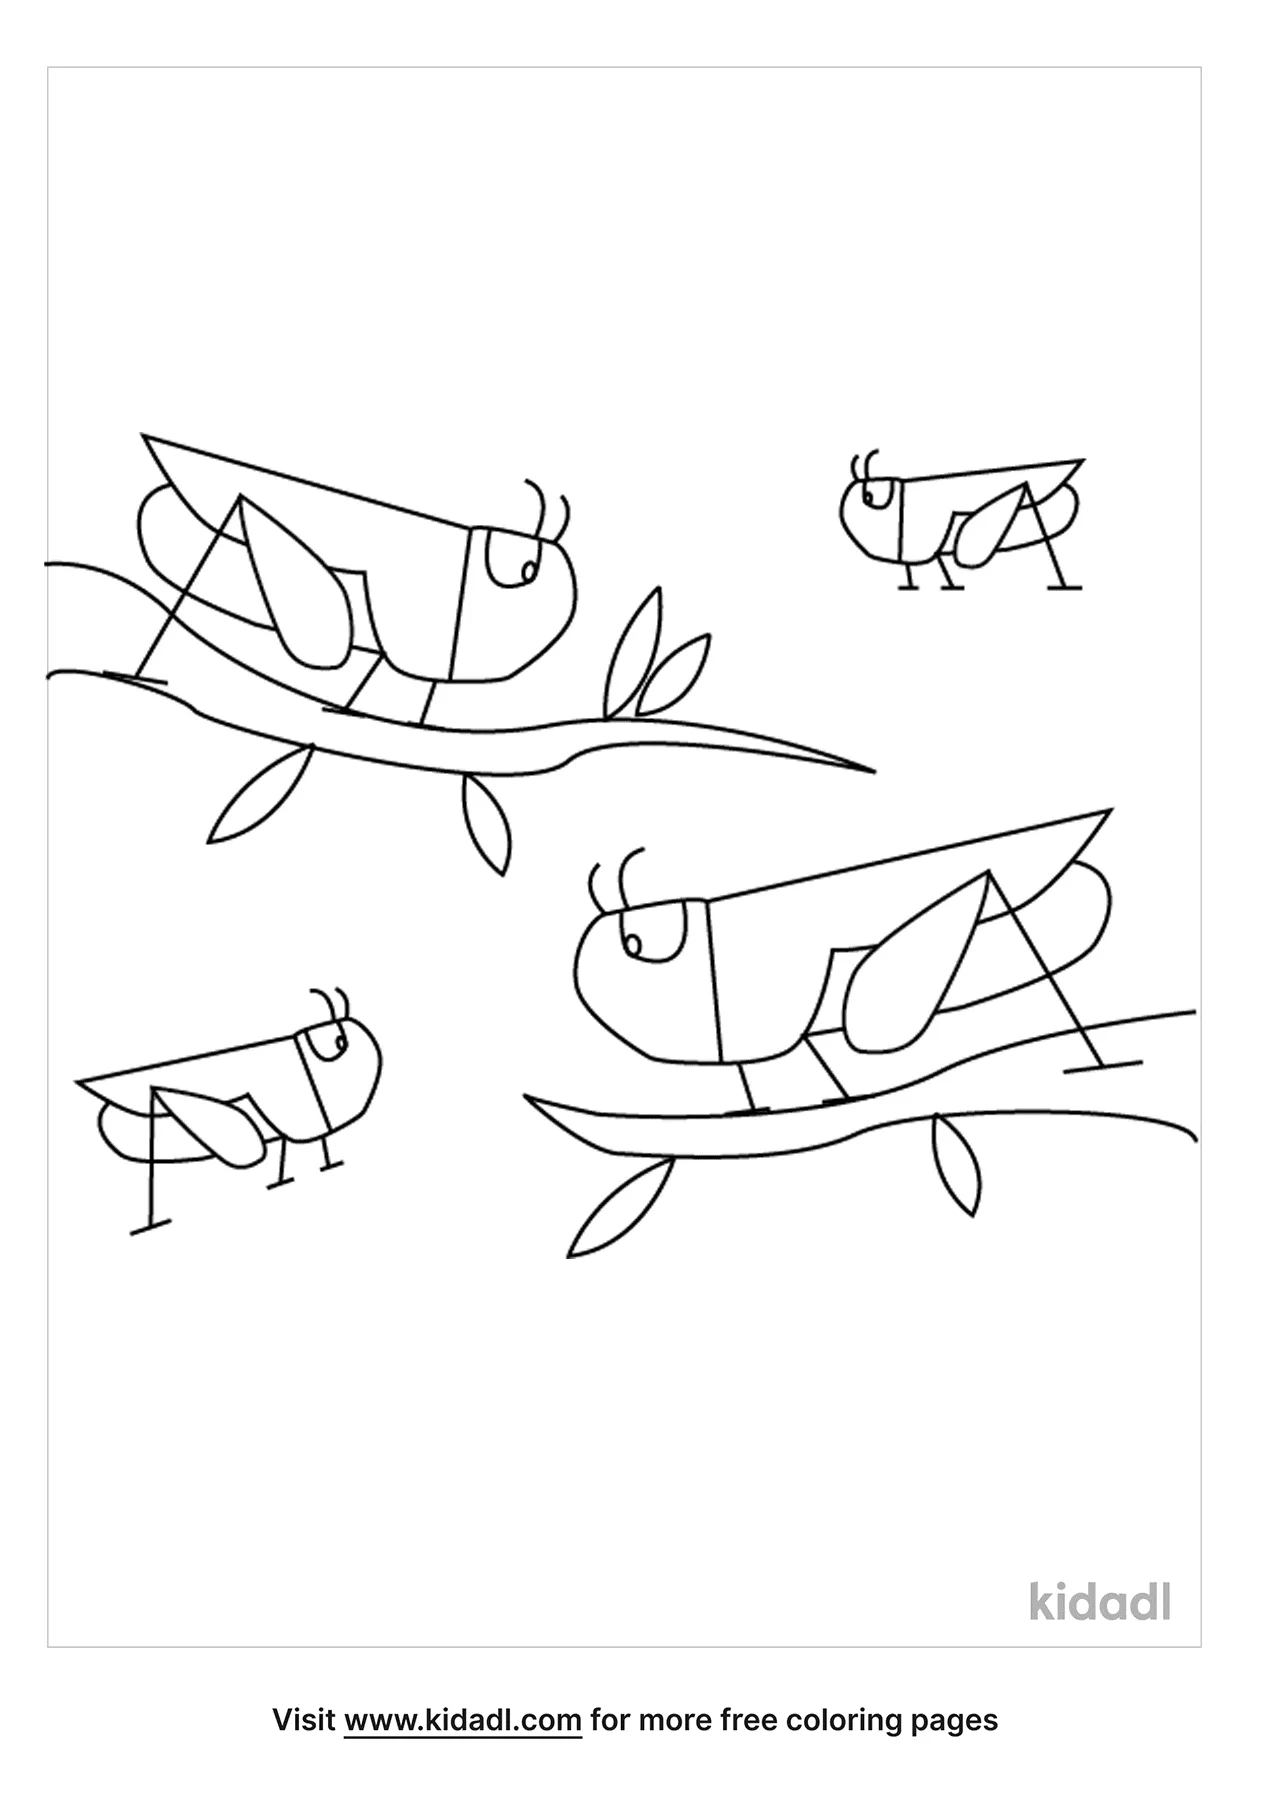 Group Of Locusts Coloring Page